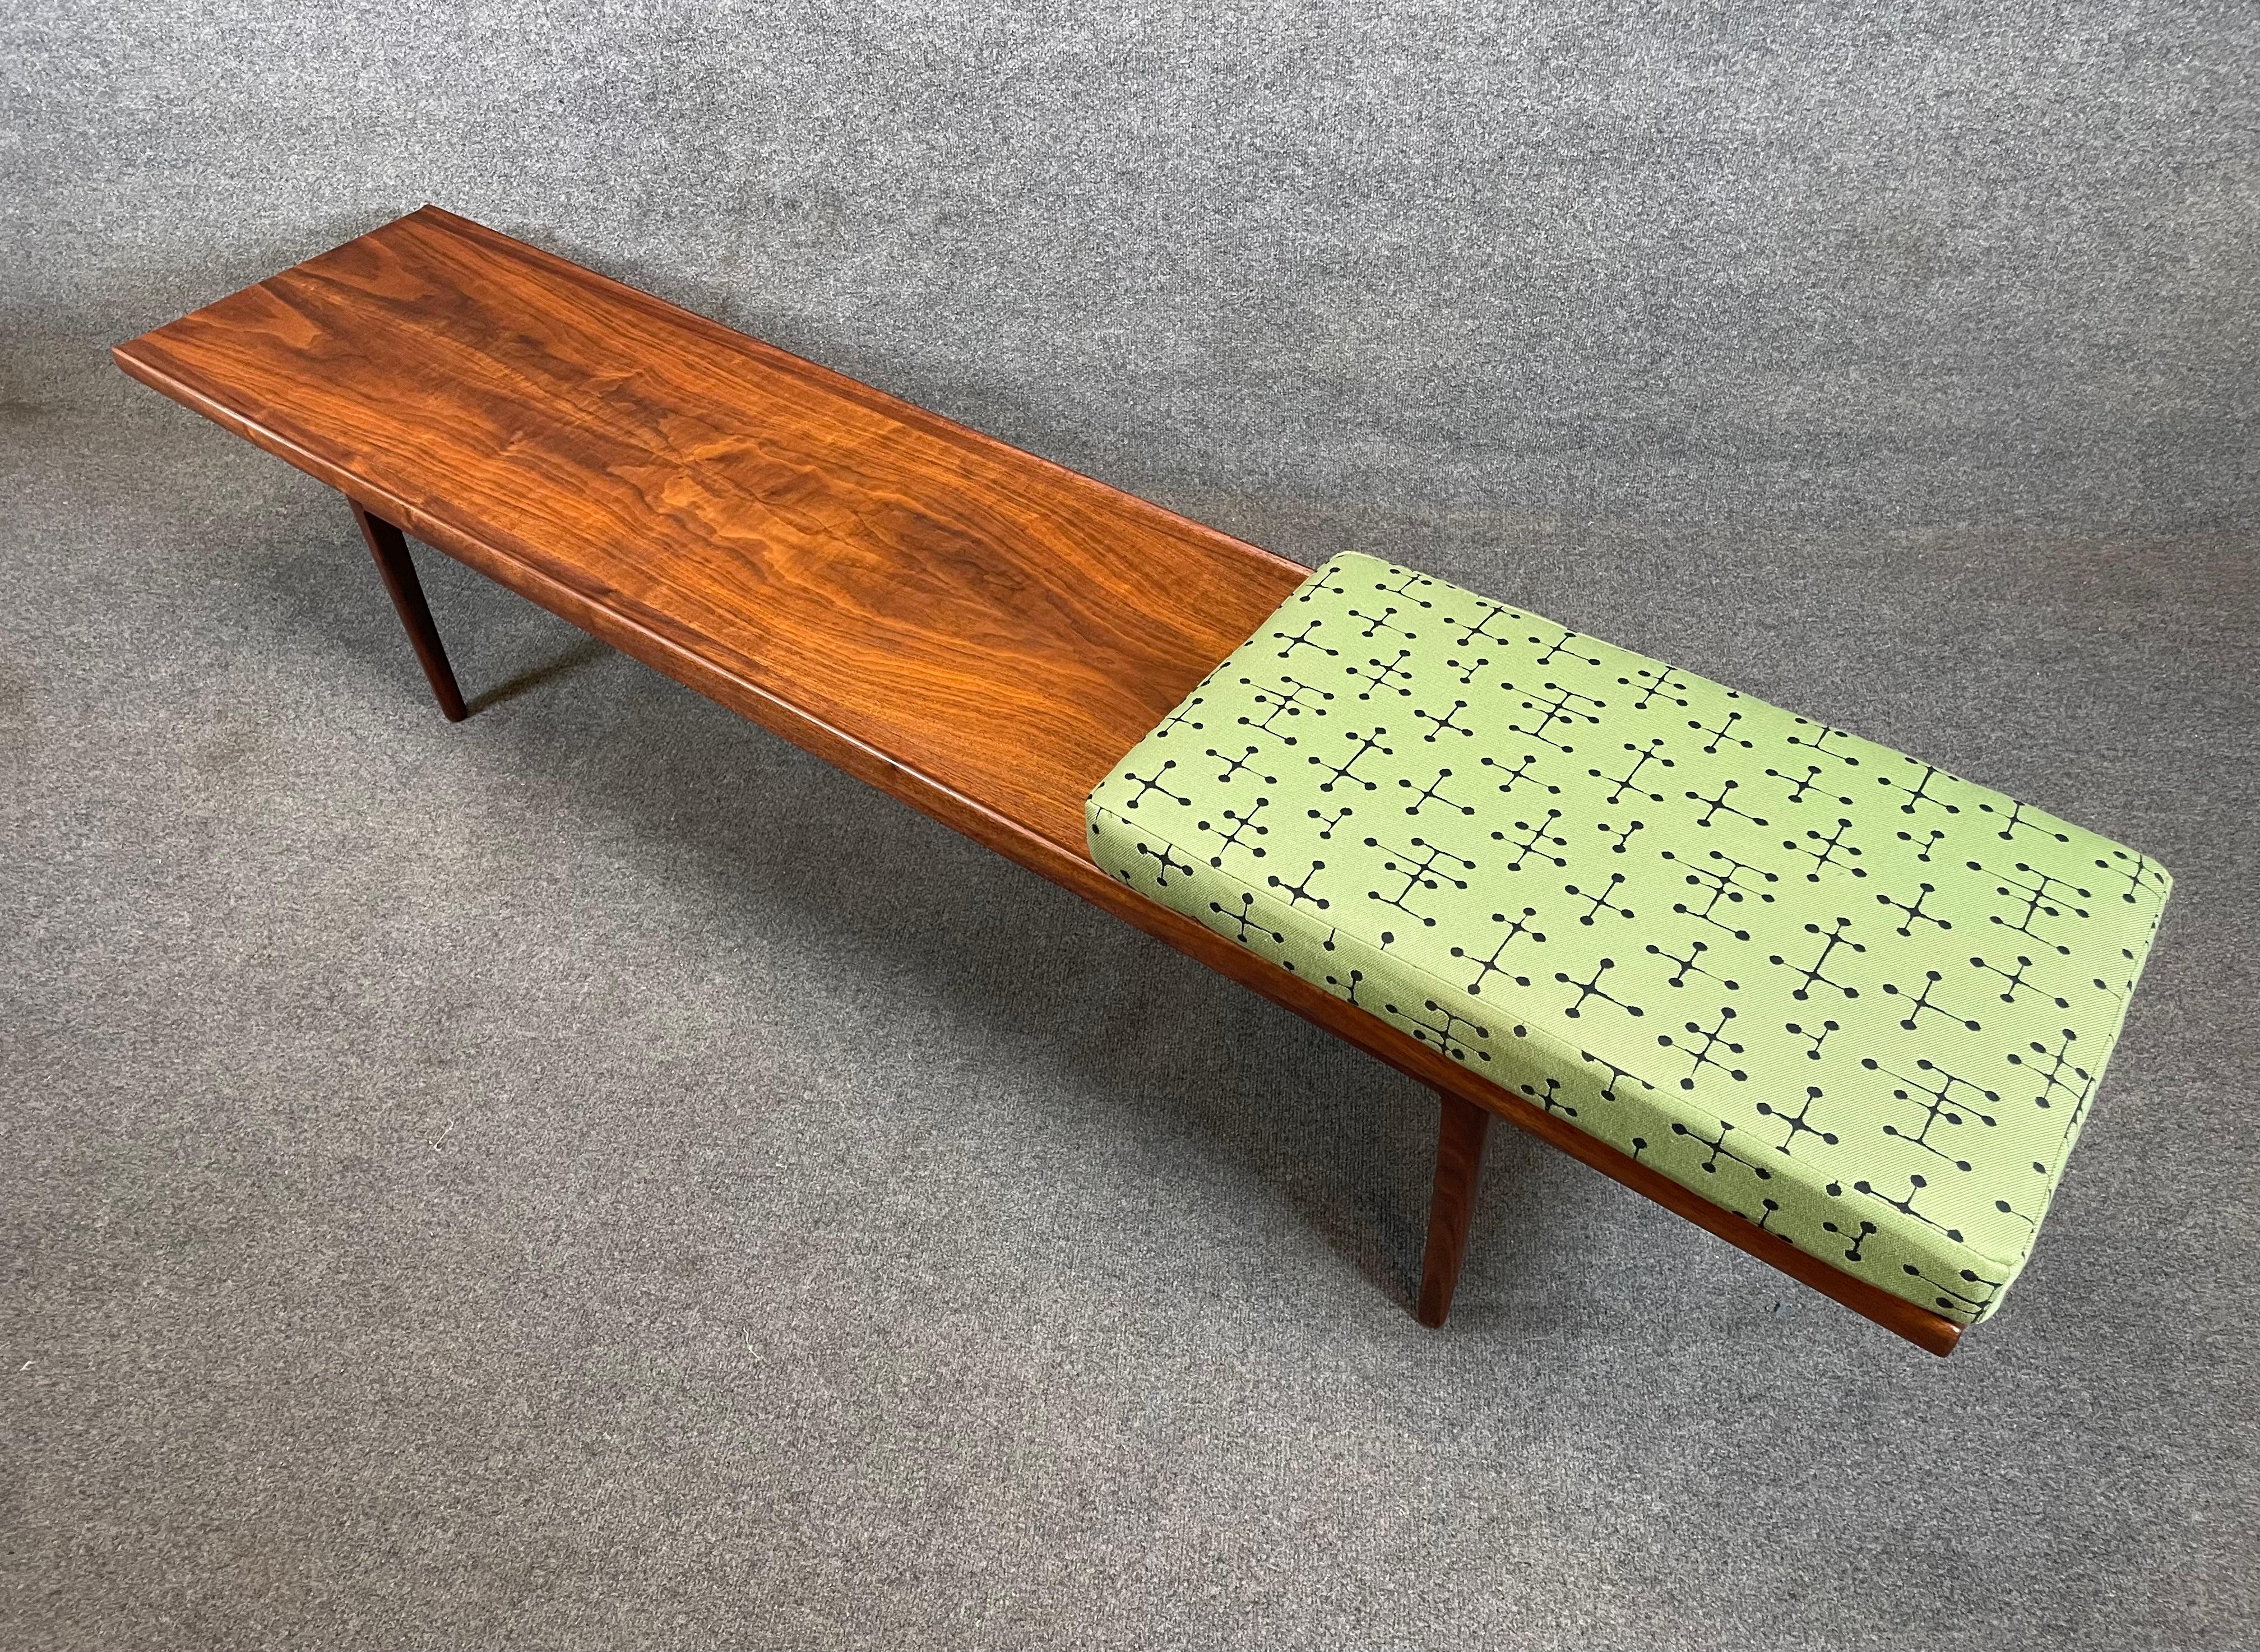 Here is a beautiful mid century modern bench in walnut designed by Kipp Stewart and manufactured by Drexel for the 